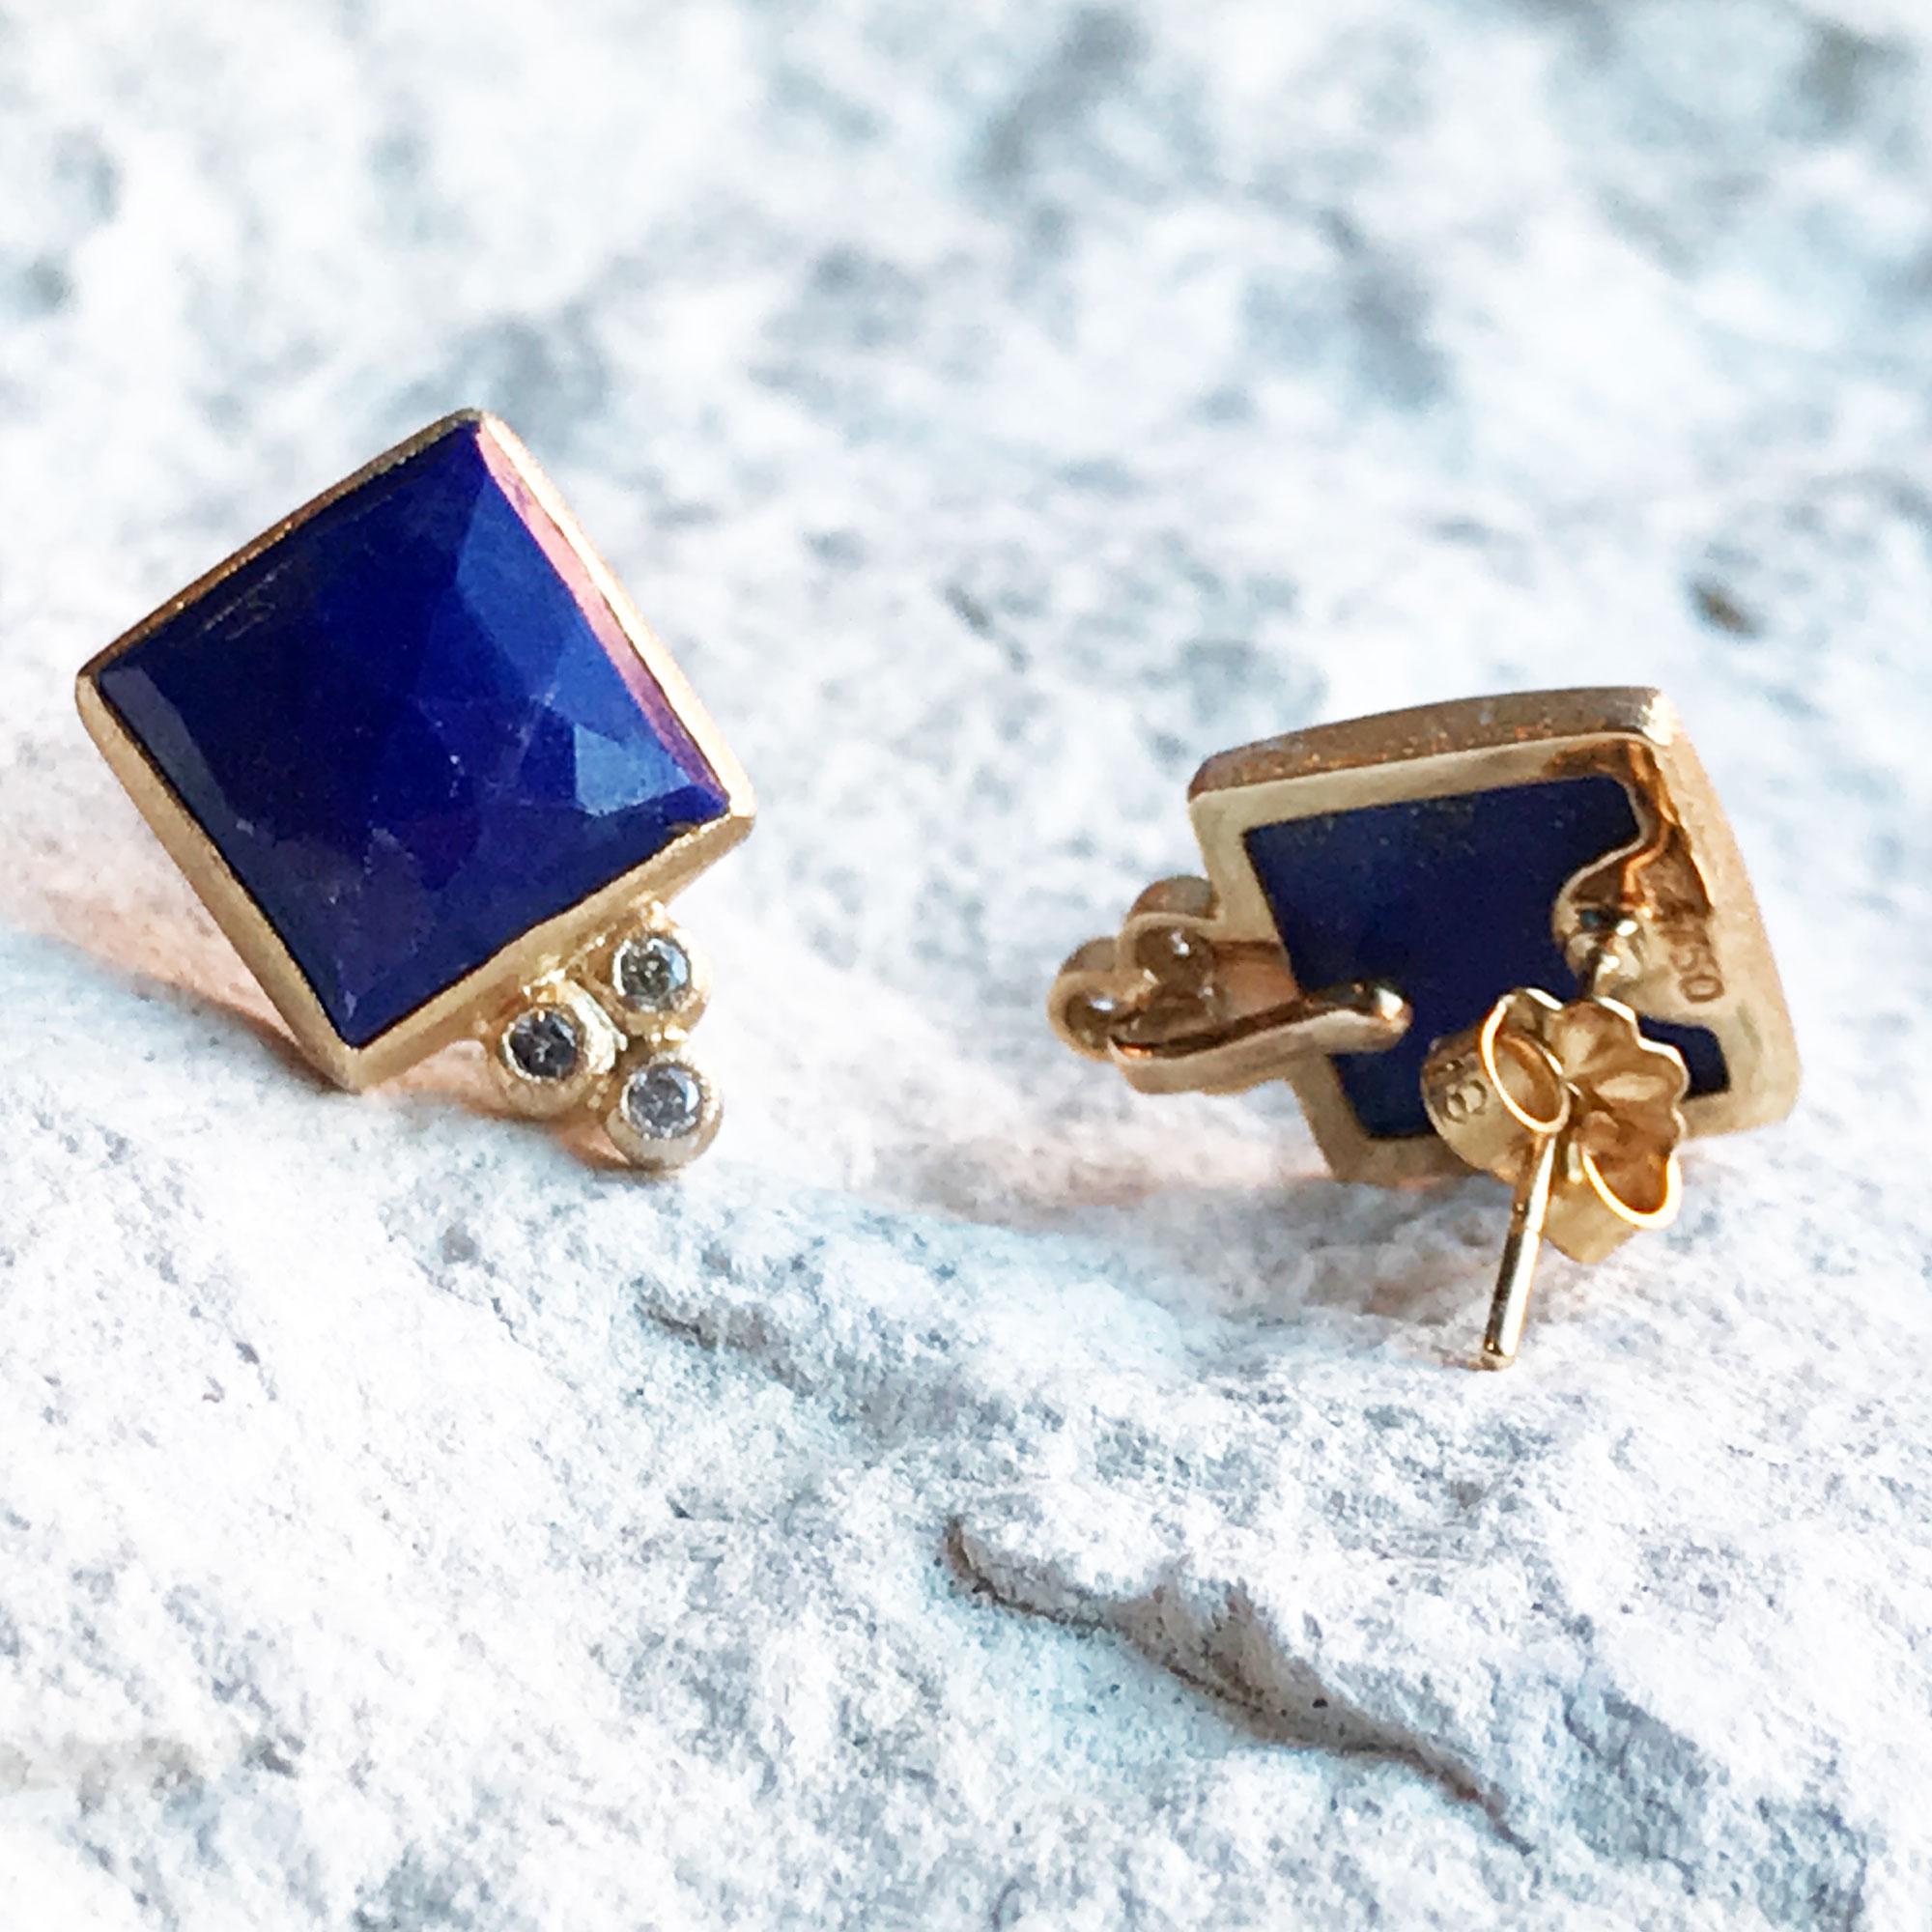 Square dance: Designed with hand-faceted lapis framed in a textured gold, our Ariana Gold Studs add a pop of color to your everyday look, with diamond accents for some extra sparkle.

Nina Nguyen Design's patent-pending earrings have an element on